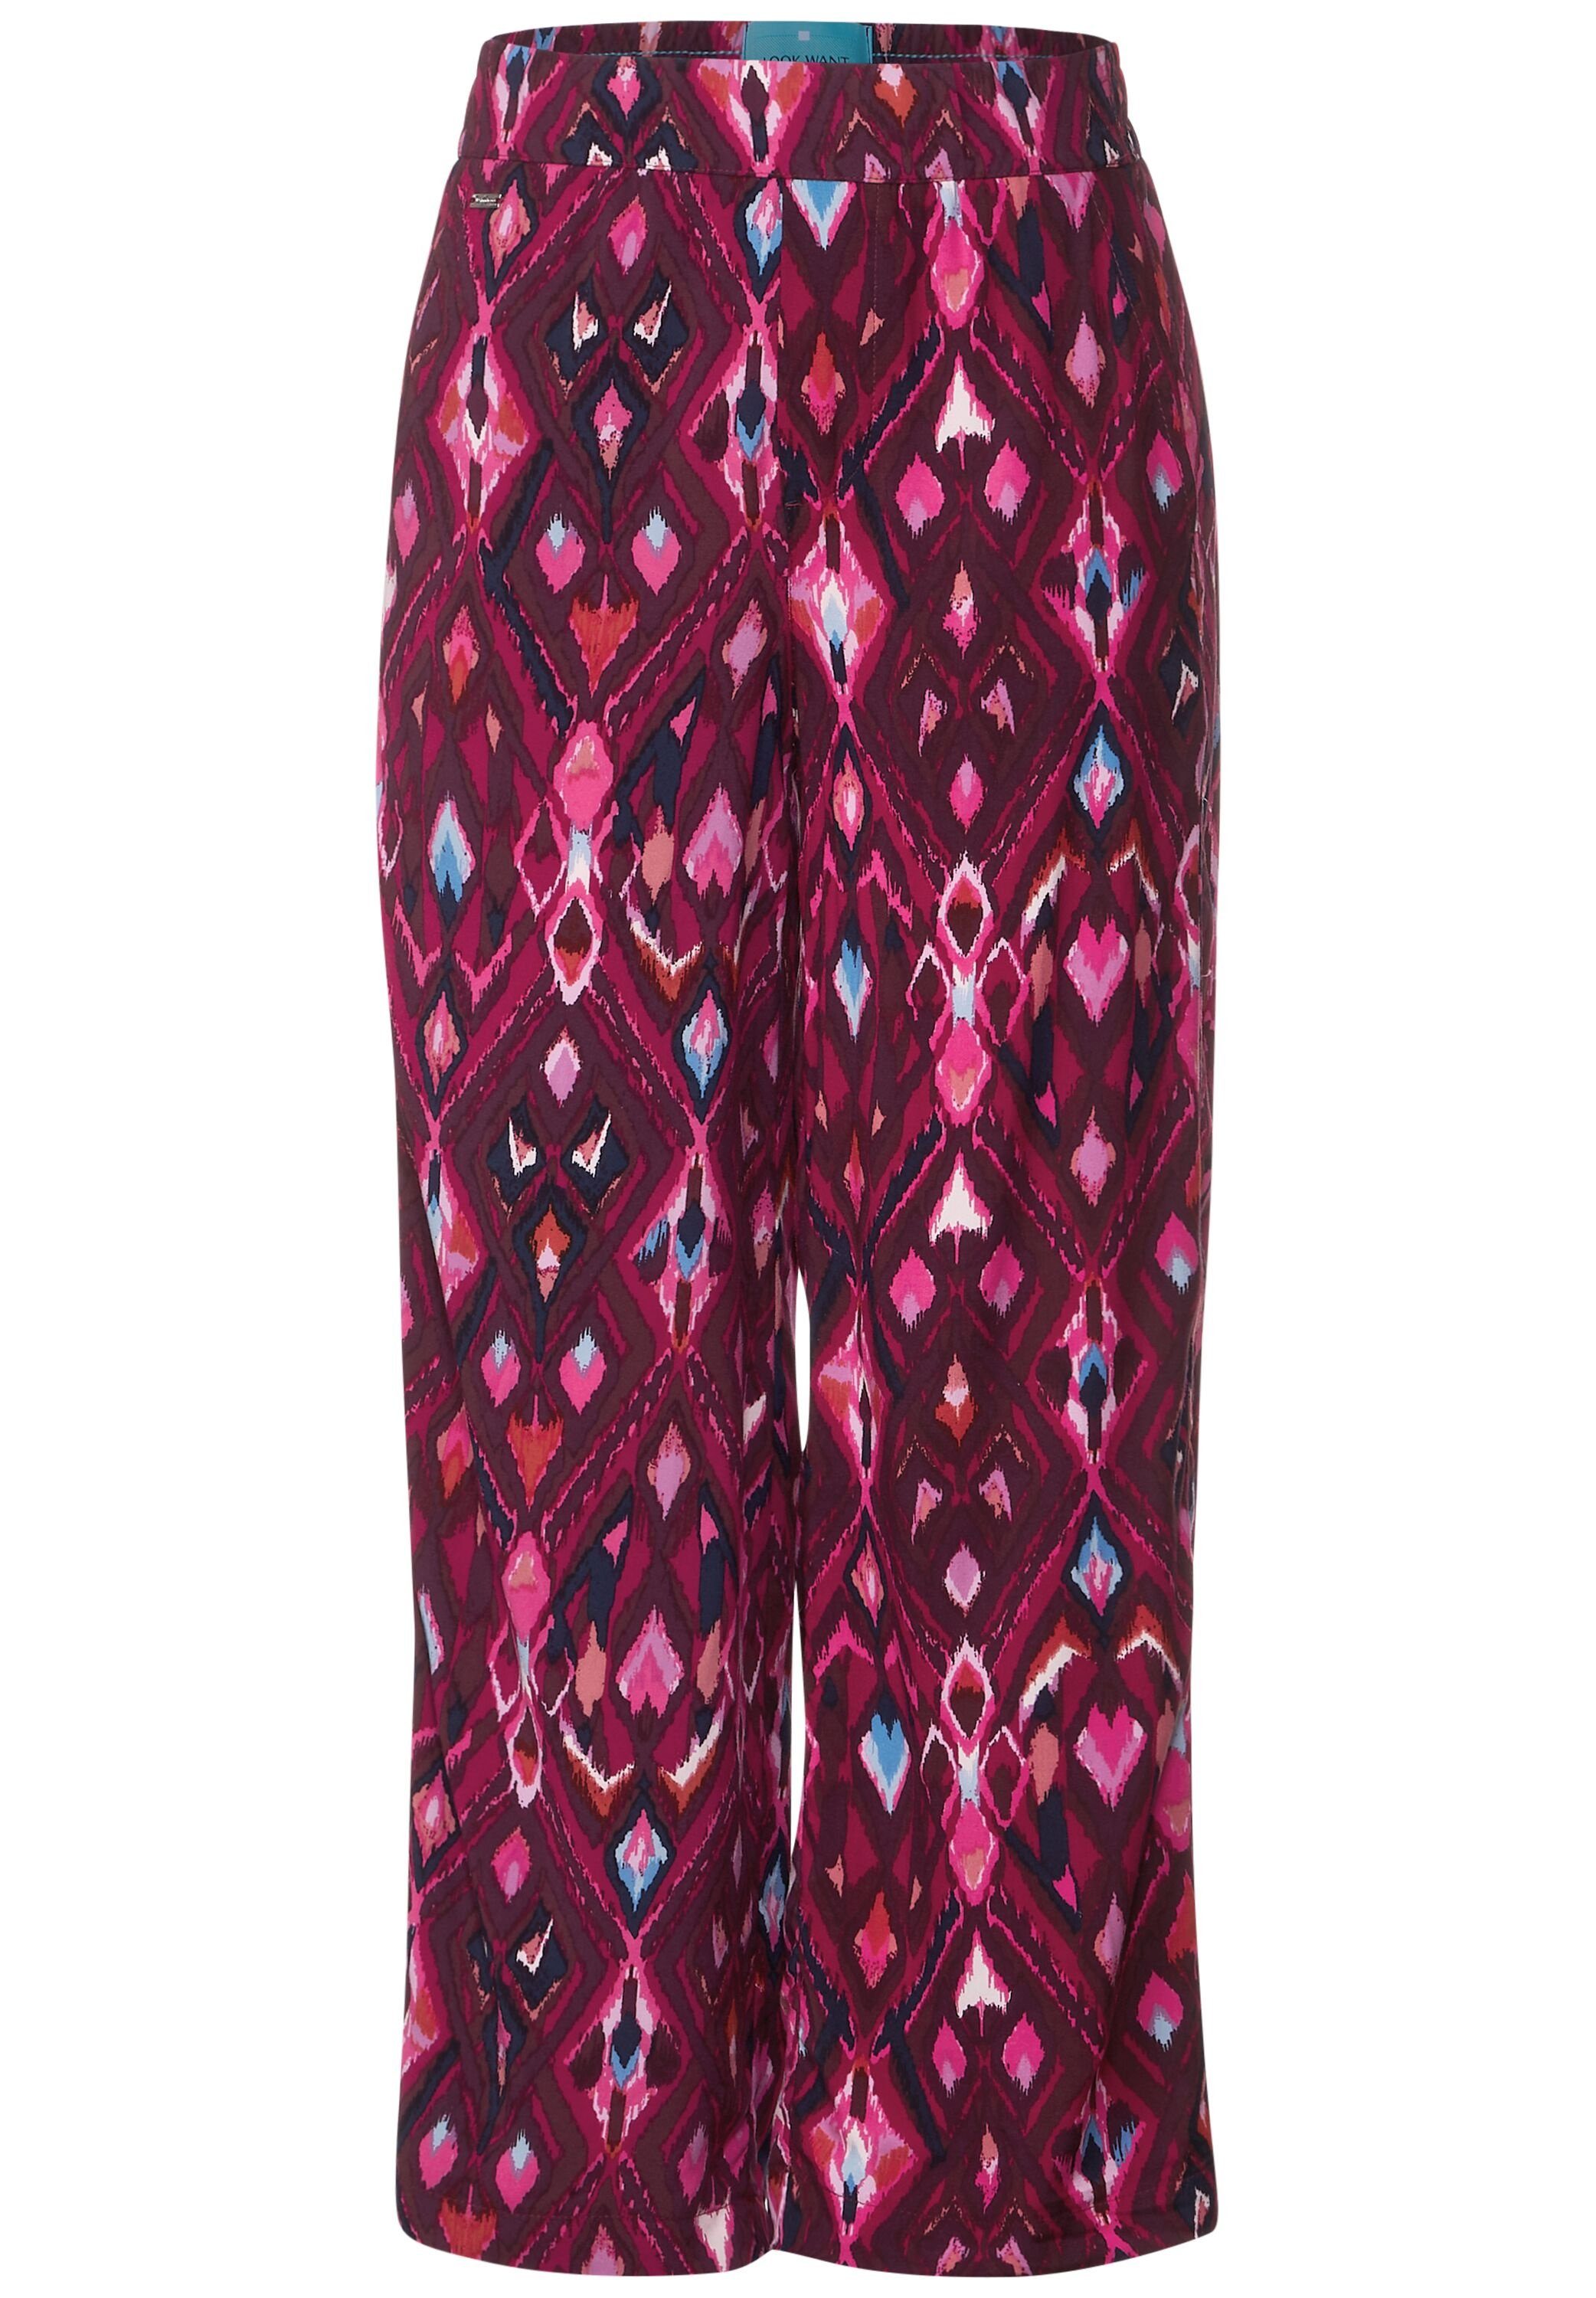 STREET ONE tamed Loose mit Fit Stoffhose Ikatprint Hose berry